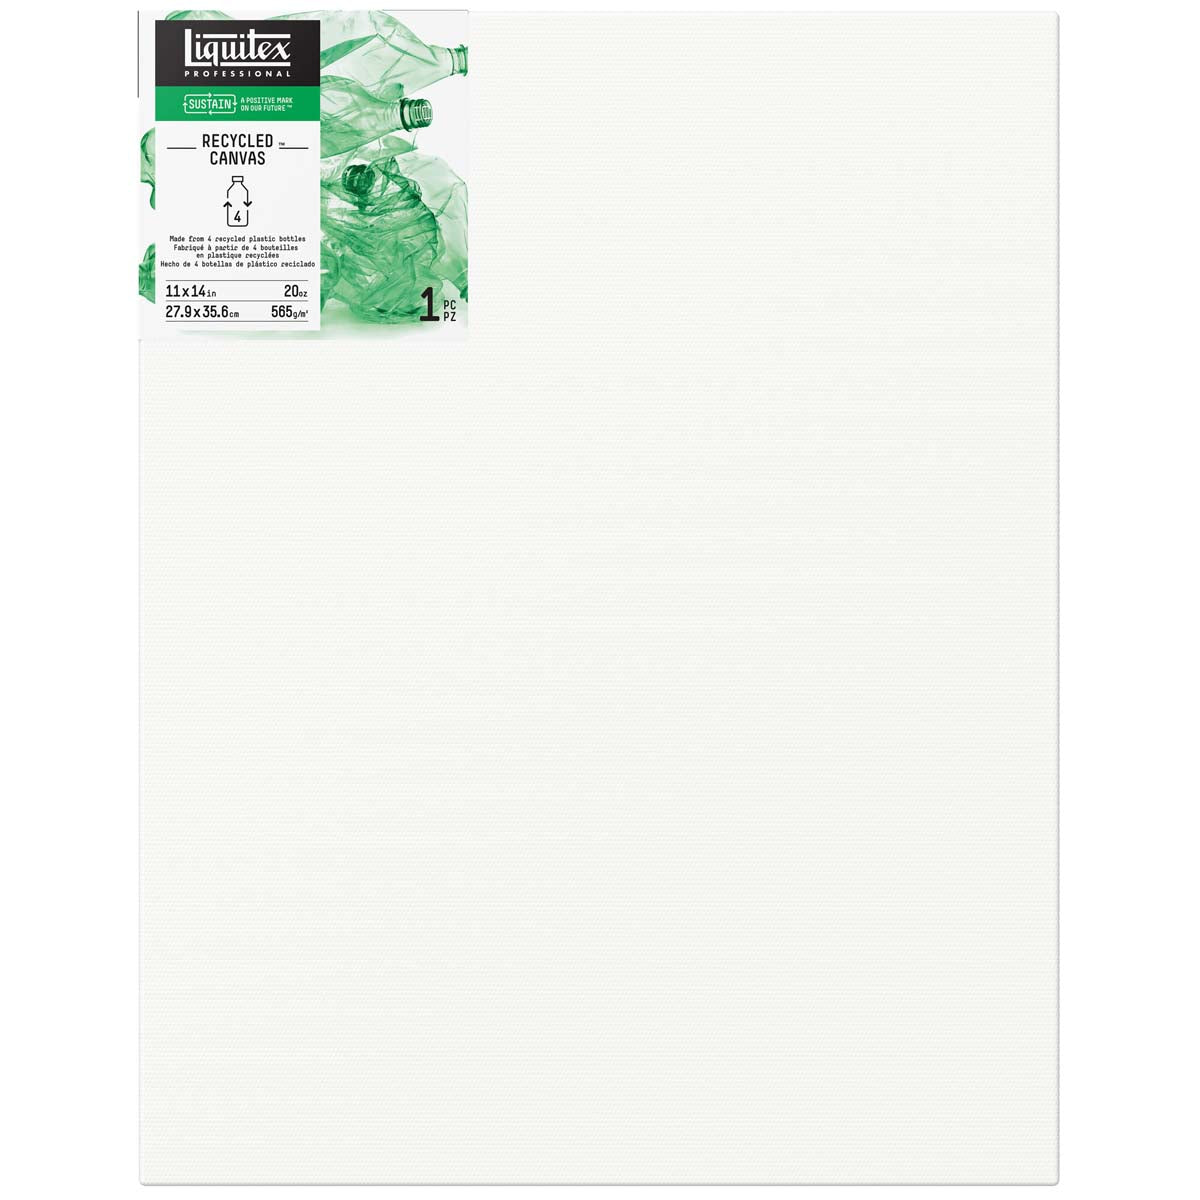 Liquitex Recycled Canvas - Standard Edge - 11x14 inches - 28x35cm